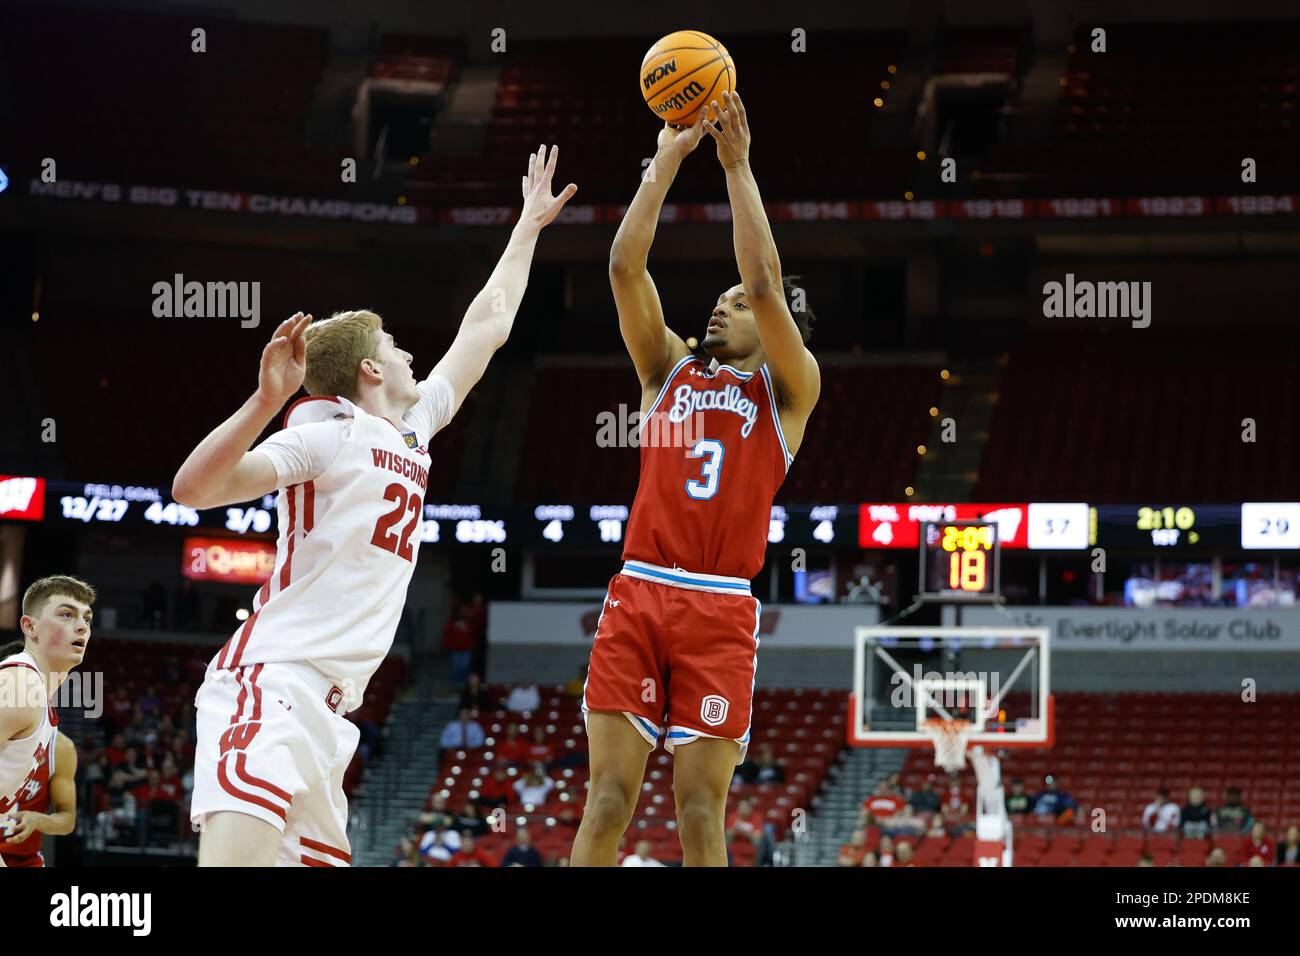 Madison, WI, USA. 14th Mar, 2023. Bradley Braves guard Zek Montgomery (3) takes a jump shot over Wisconsin Badgers forward Steven Crowl (22) during the NCAA basketball NIT First Round game between the Bradley Braves and the Wisconsin Badgers at the Kohl Center in Madison, WI. Darren Lee/CSM/Alamy Live News Stock Photo